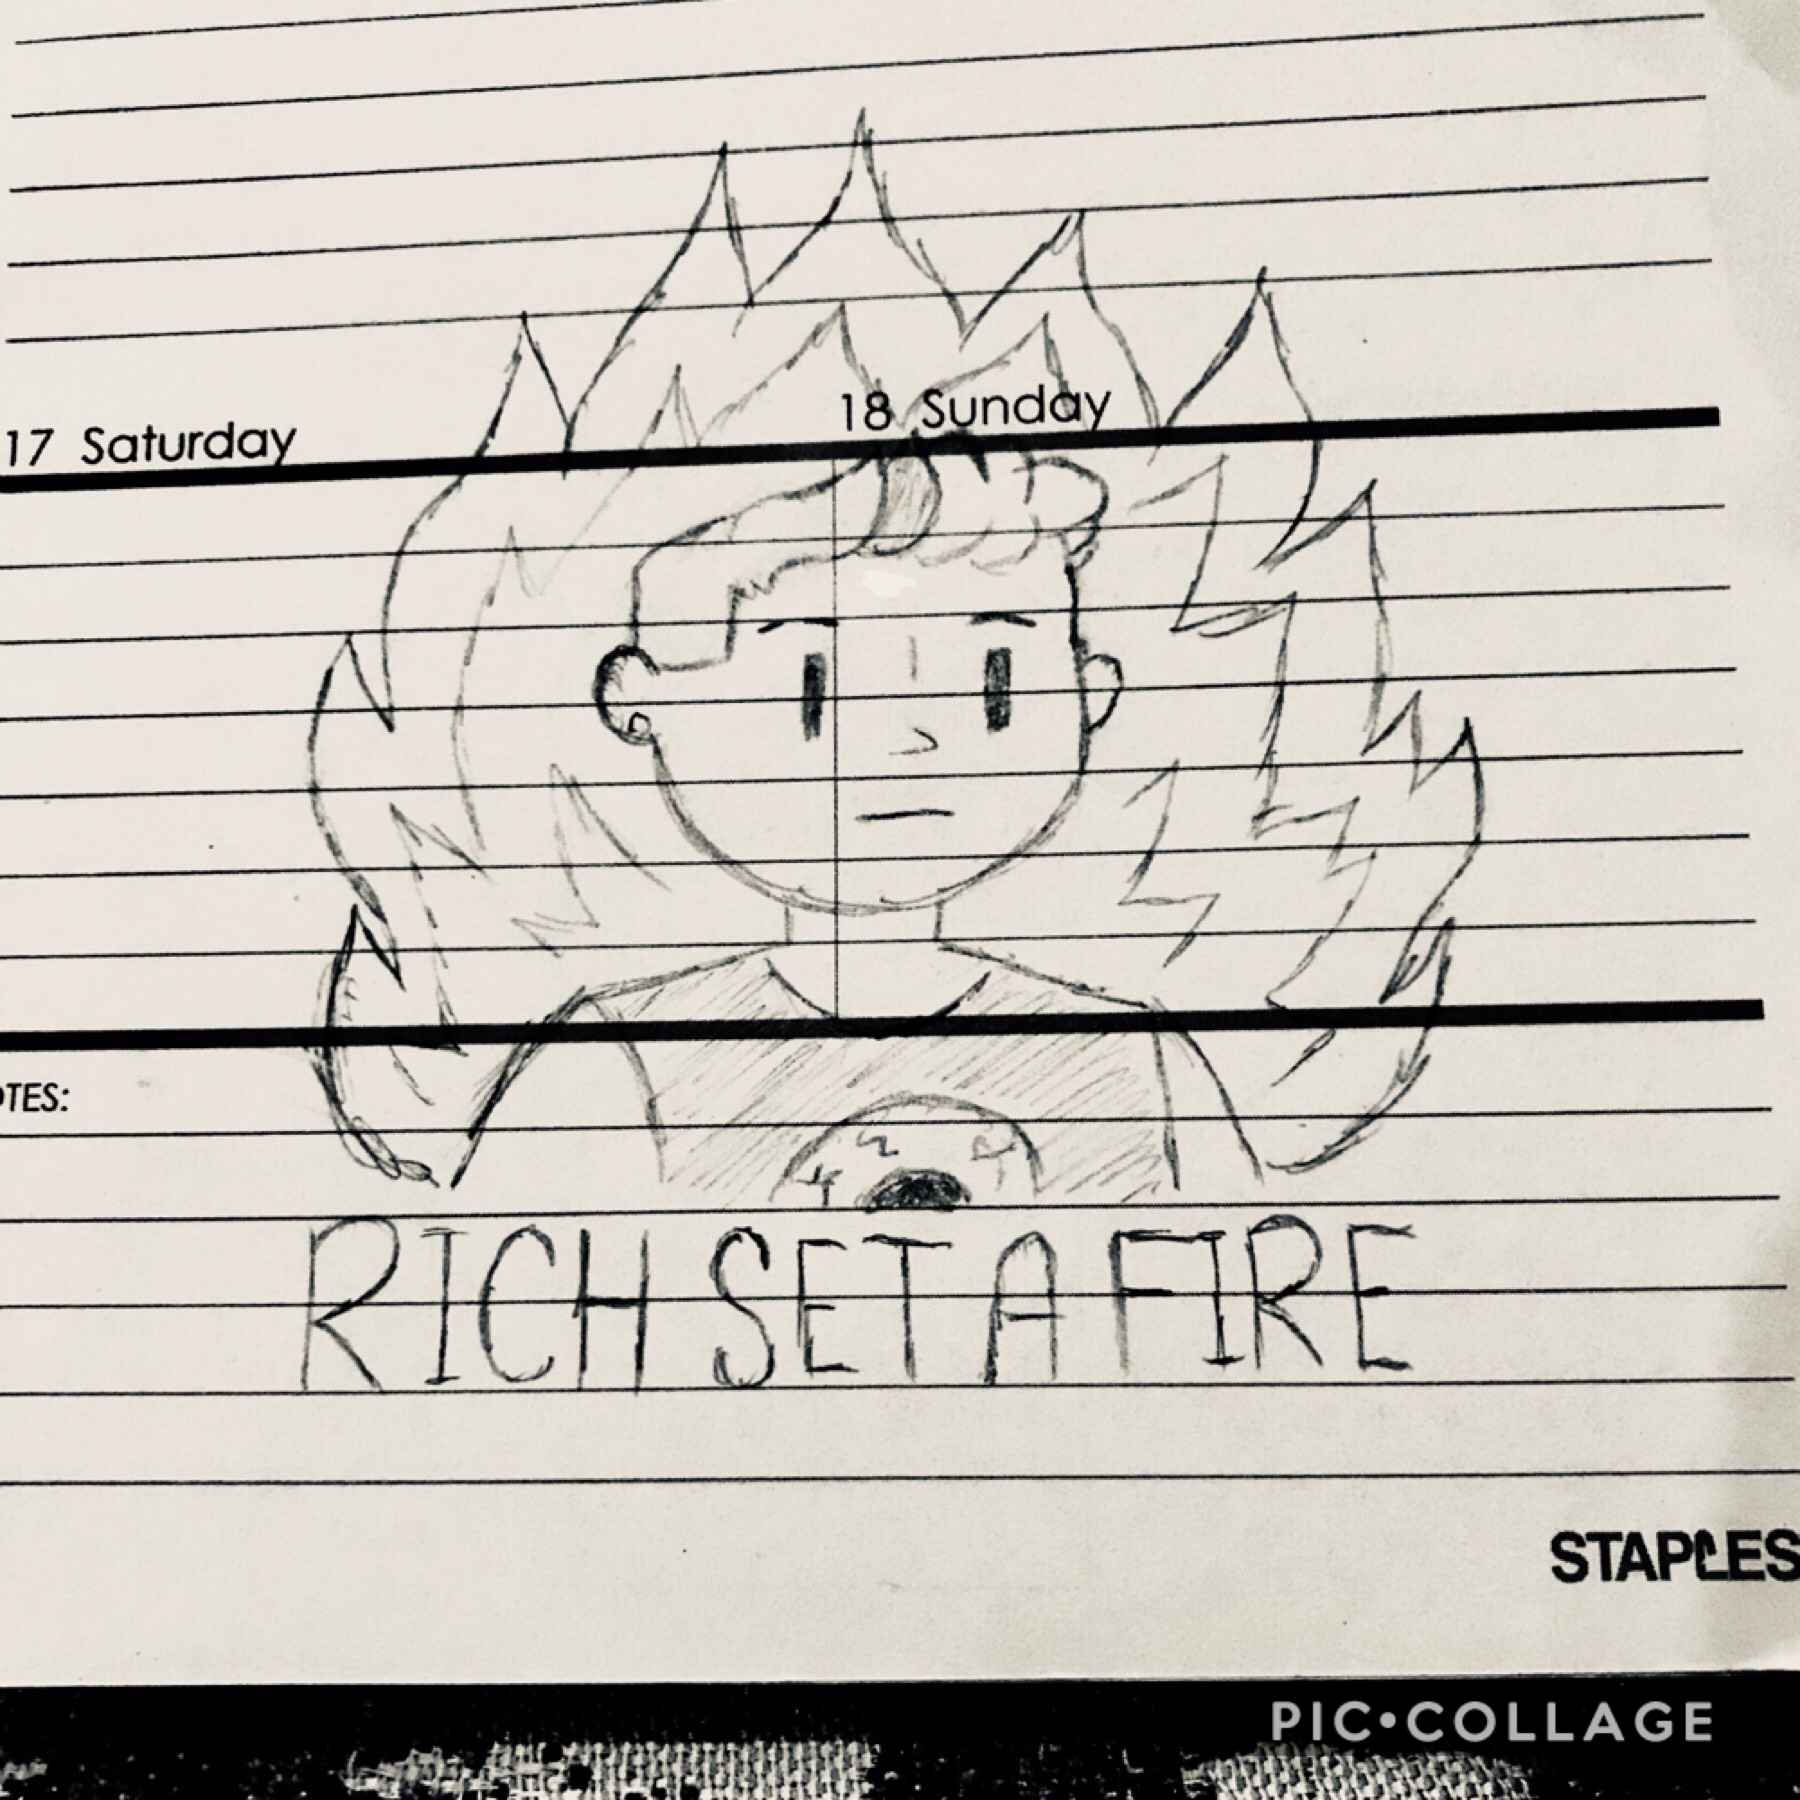 also during class today i drew my new main account profile picture and it’s cute lol even if it’s,,kinda sad oops i love rich he’s my favorite bi icon (reference picture in remixes)